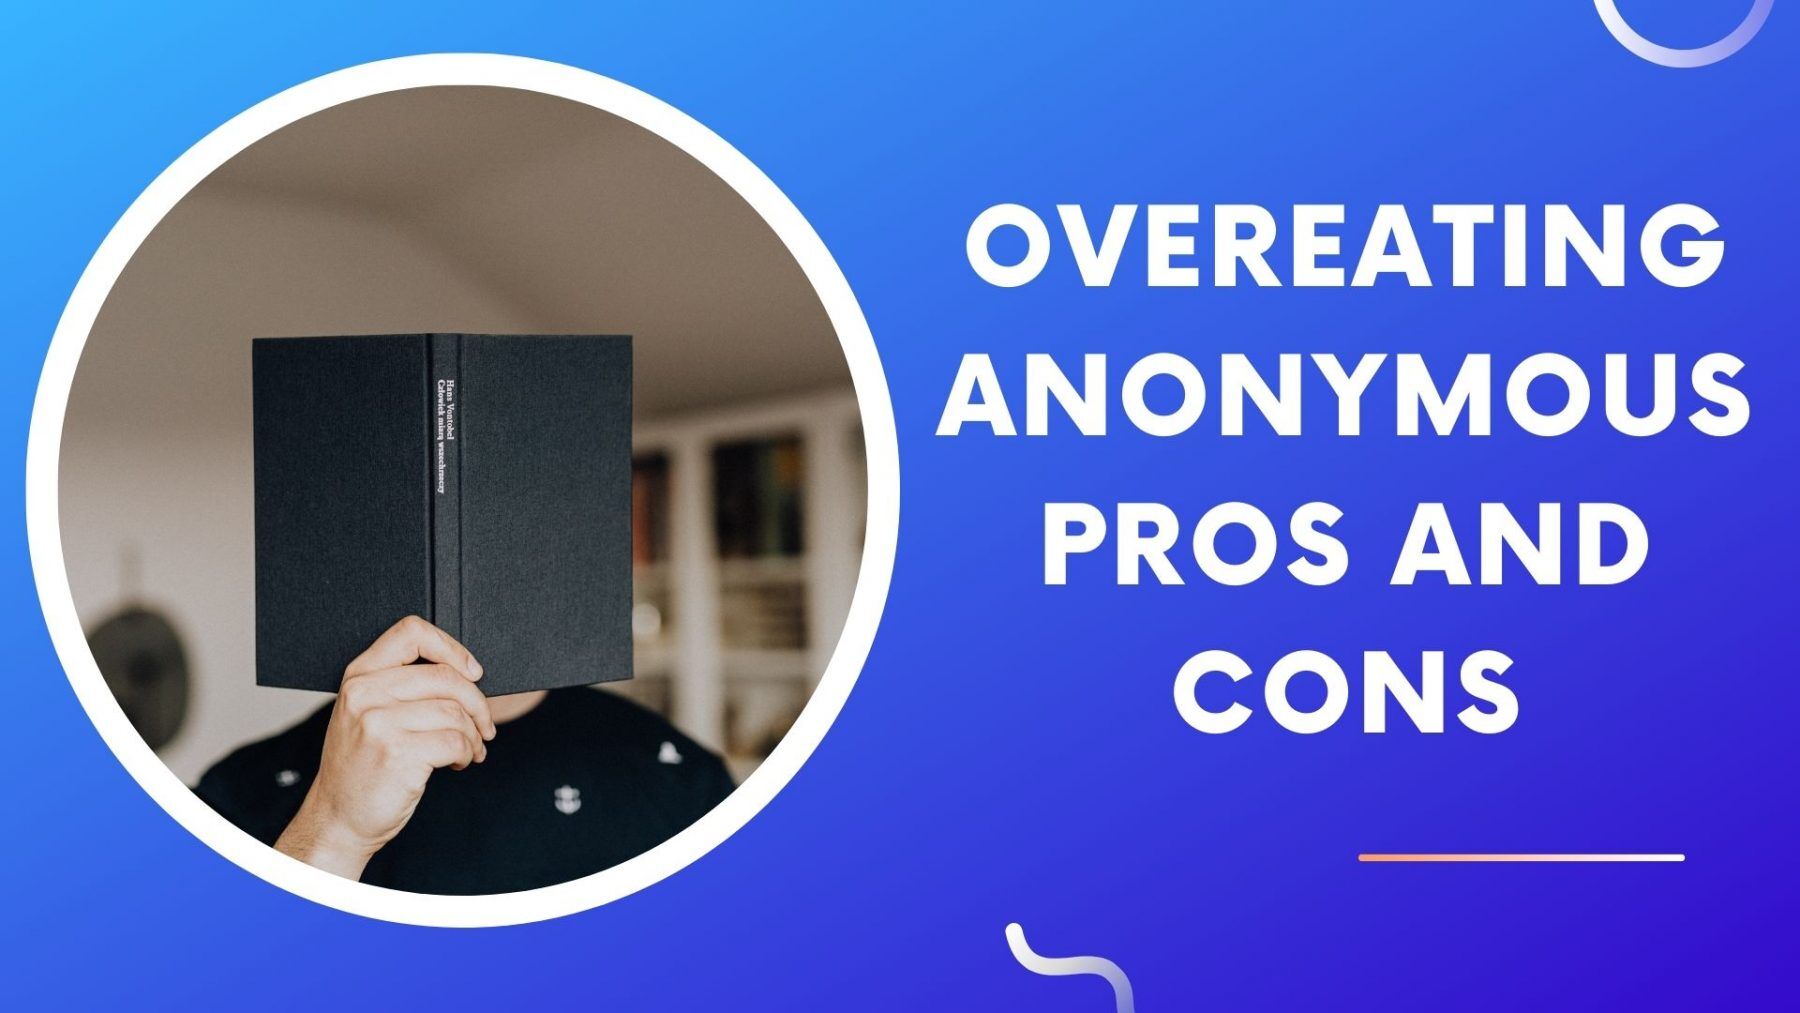 Overeating Anonymous Pros and cons